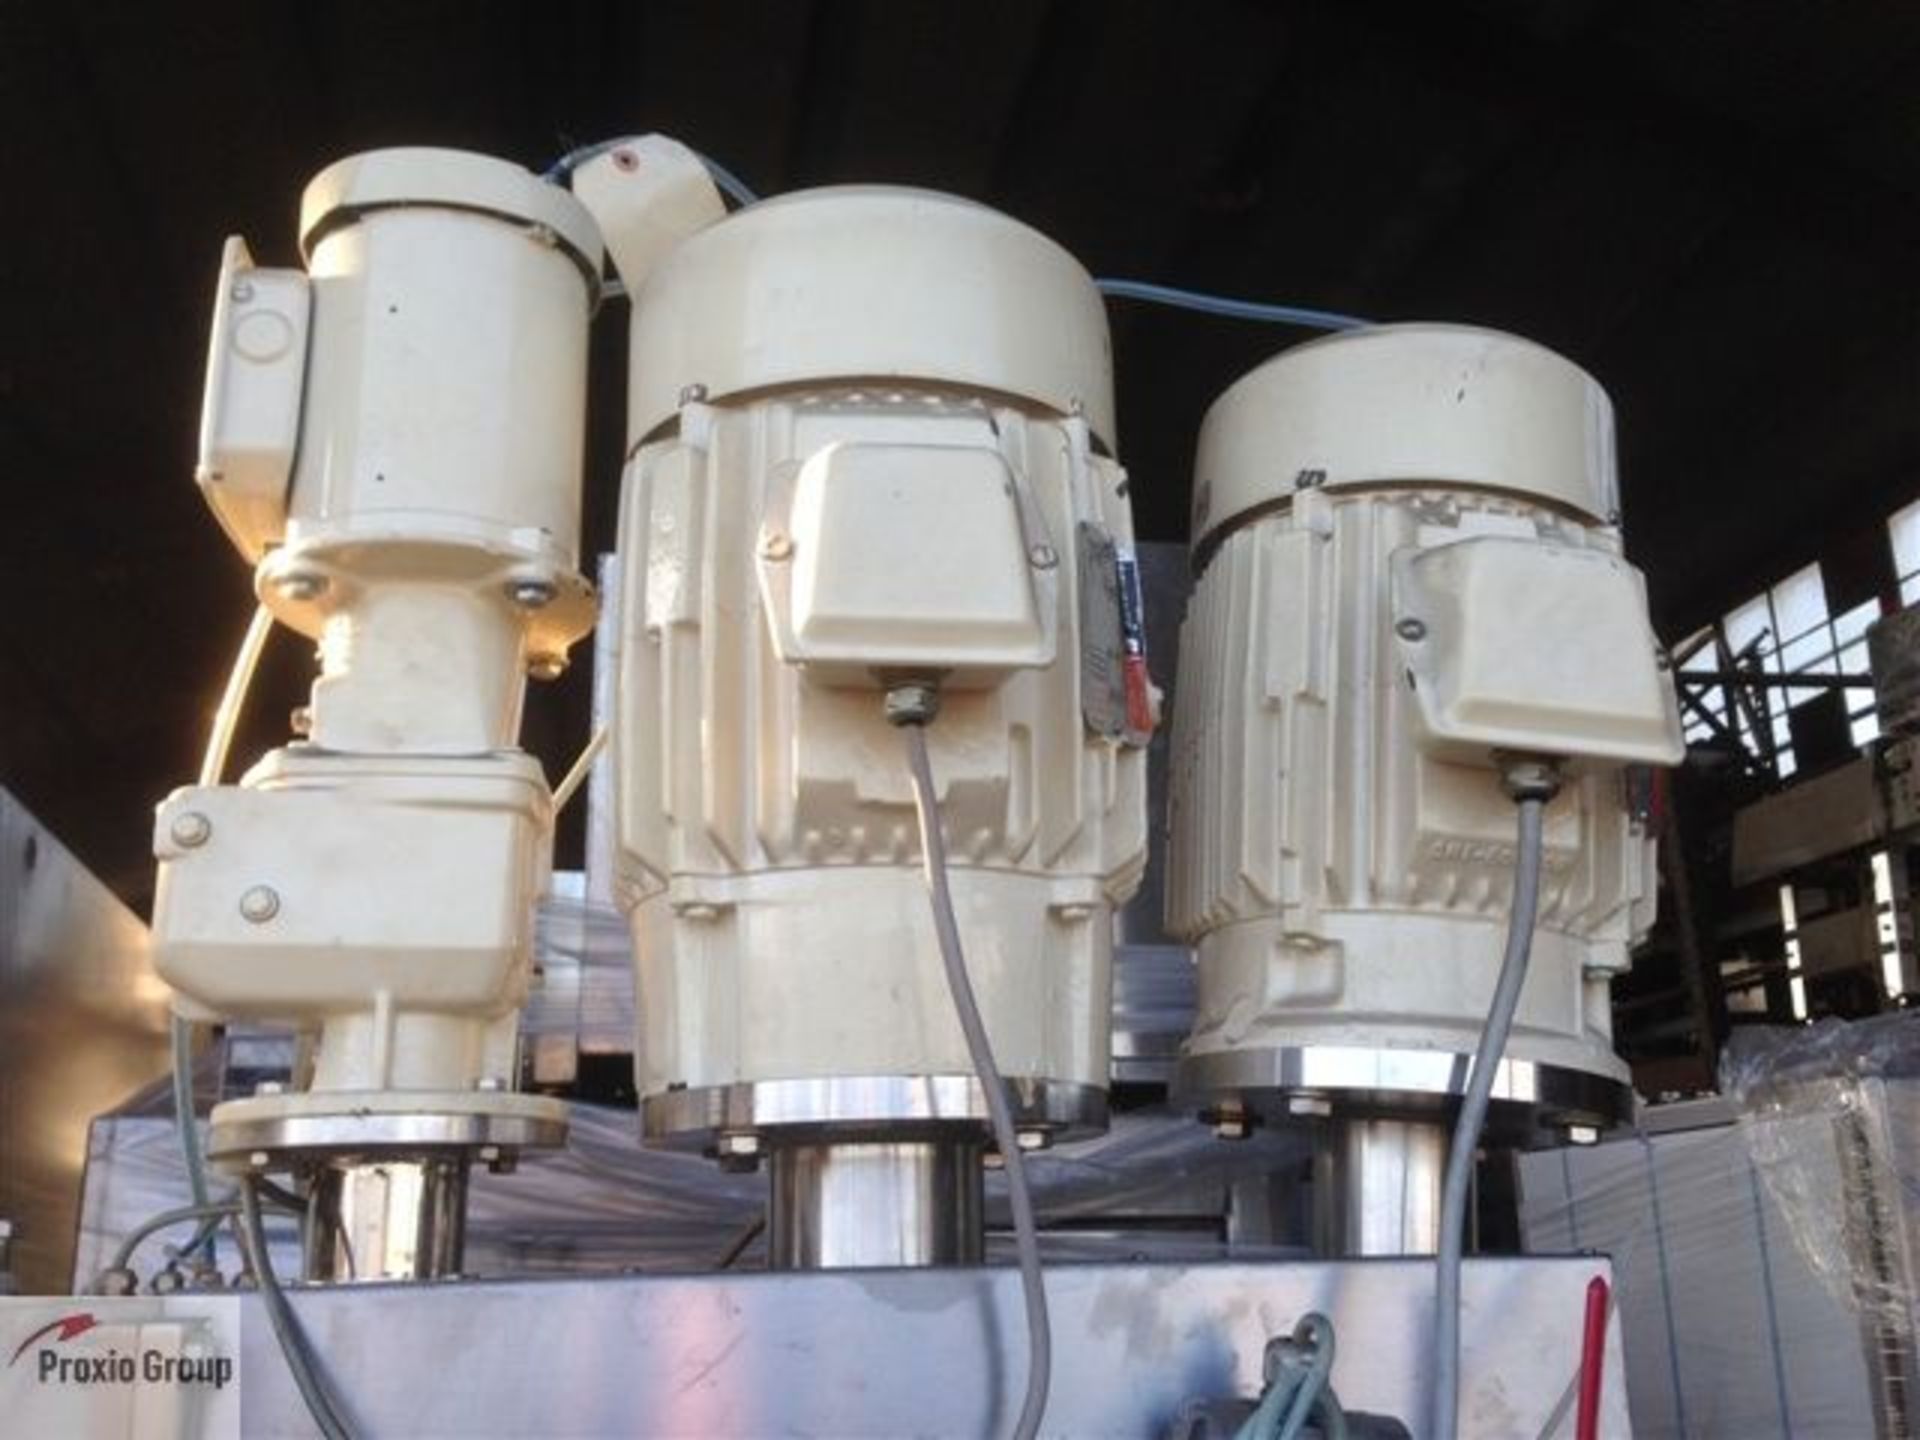 Fryma VME-50, 50 Liter jacketed, Process Mixer **See Auctioneers Note** - Image 4 of 13